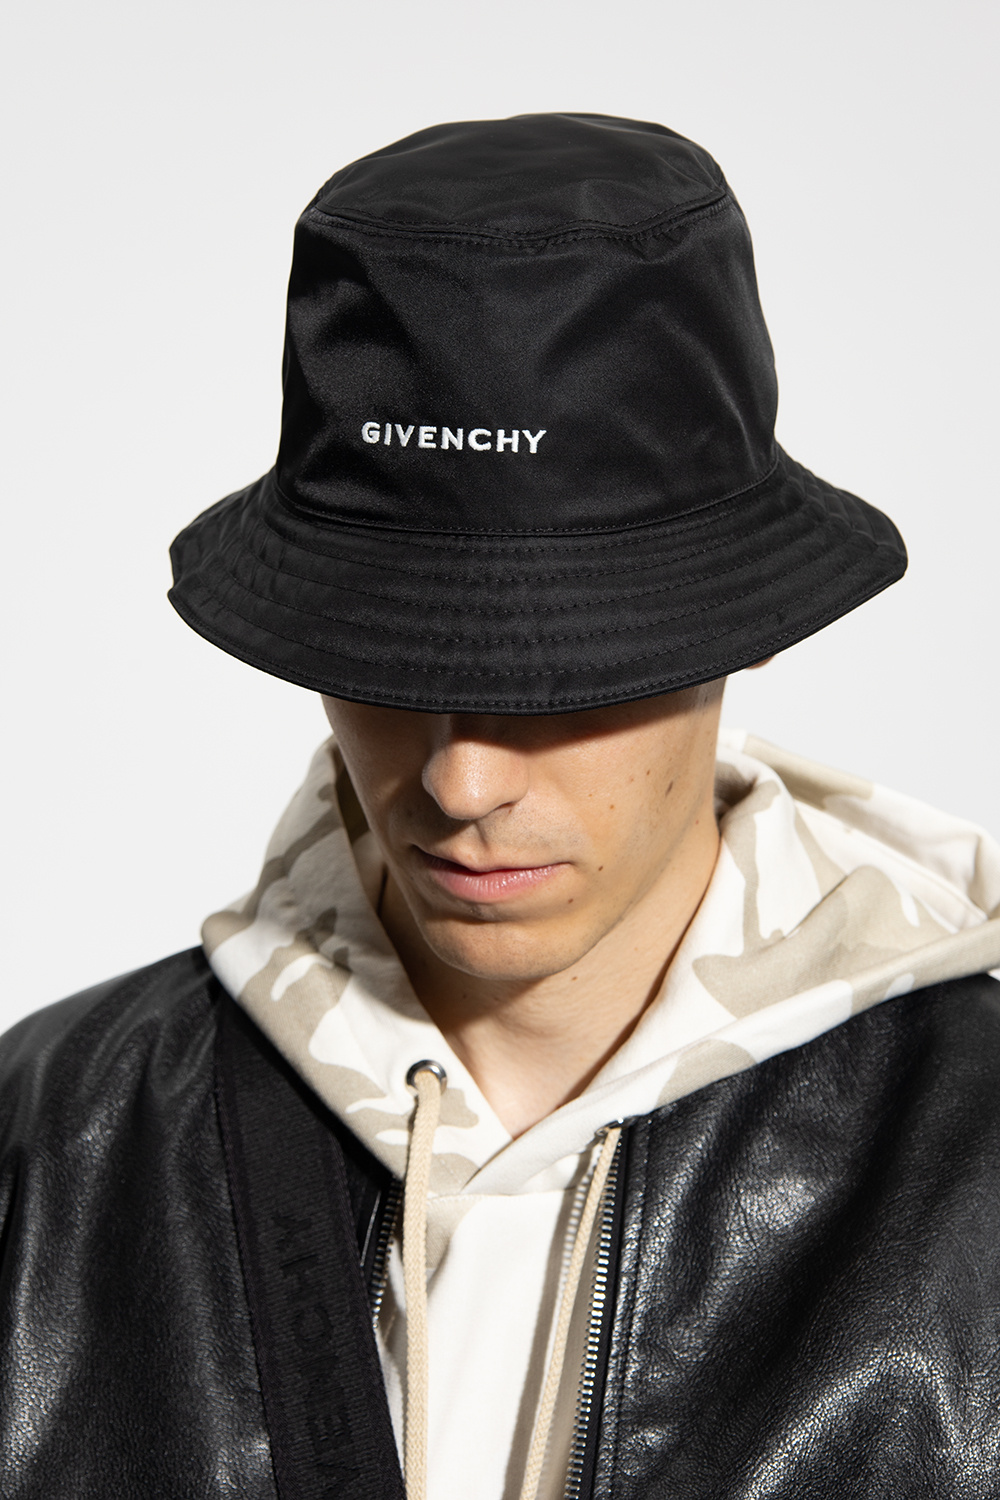 GIVENCHY バケットハット | www.innoveering.net